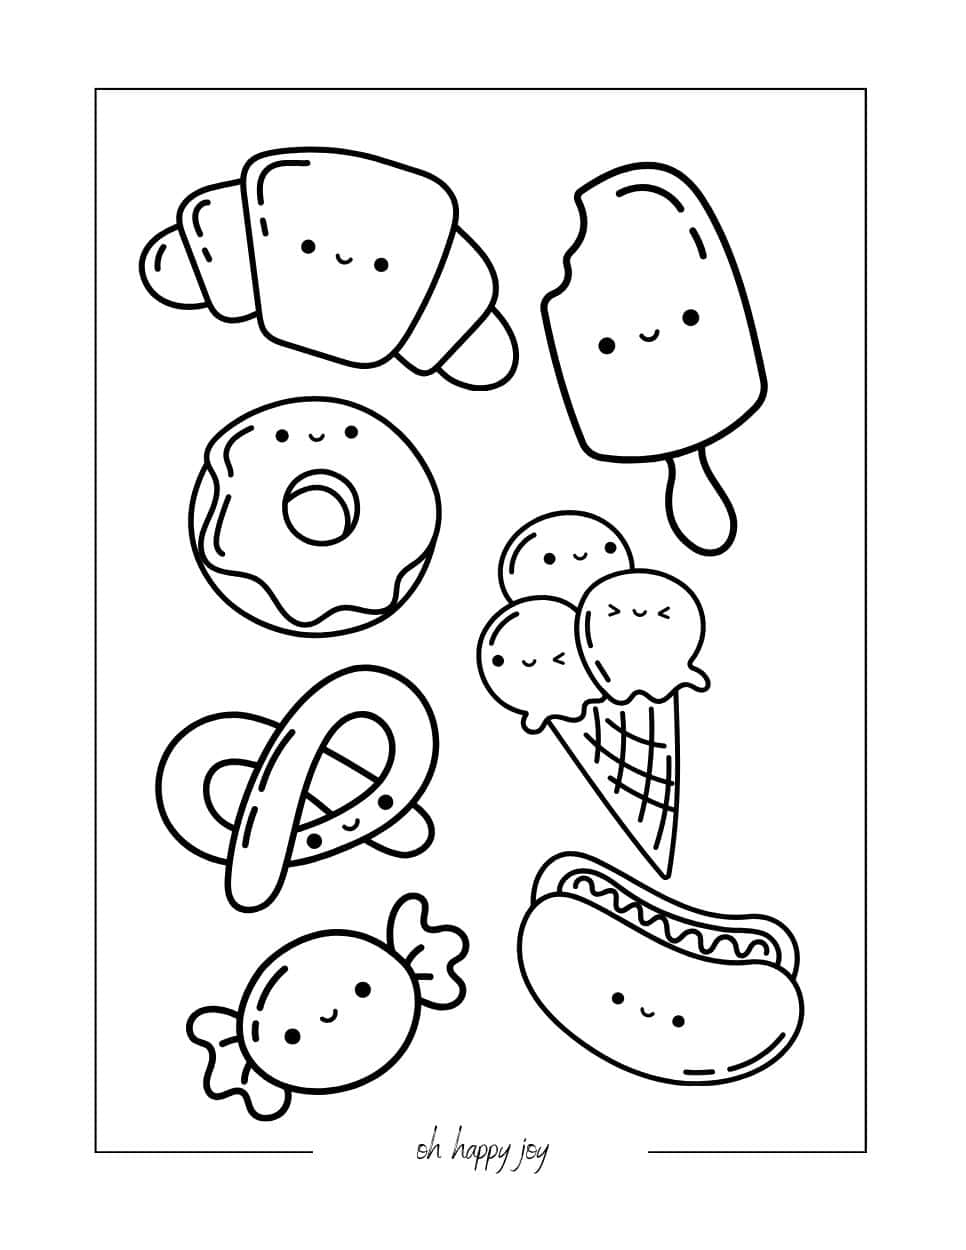 cute food pastries coloring page